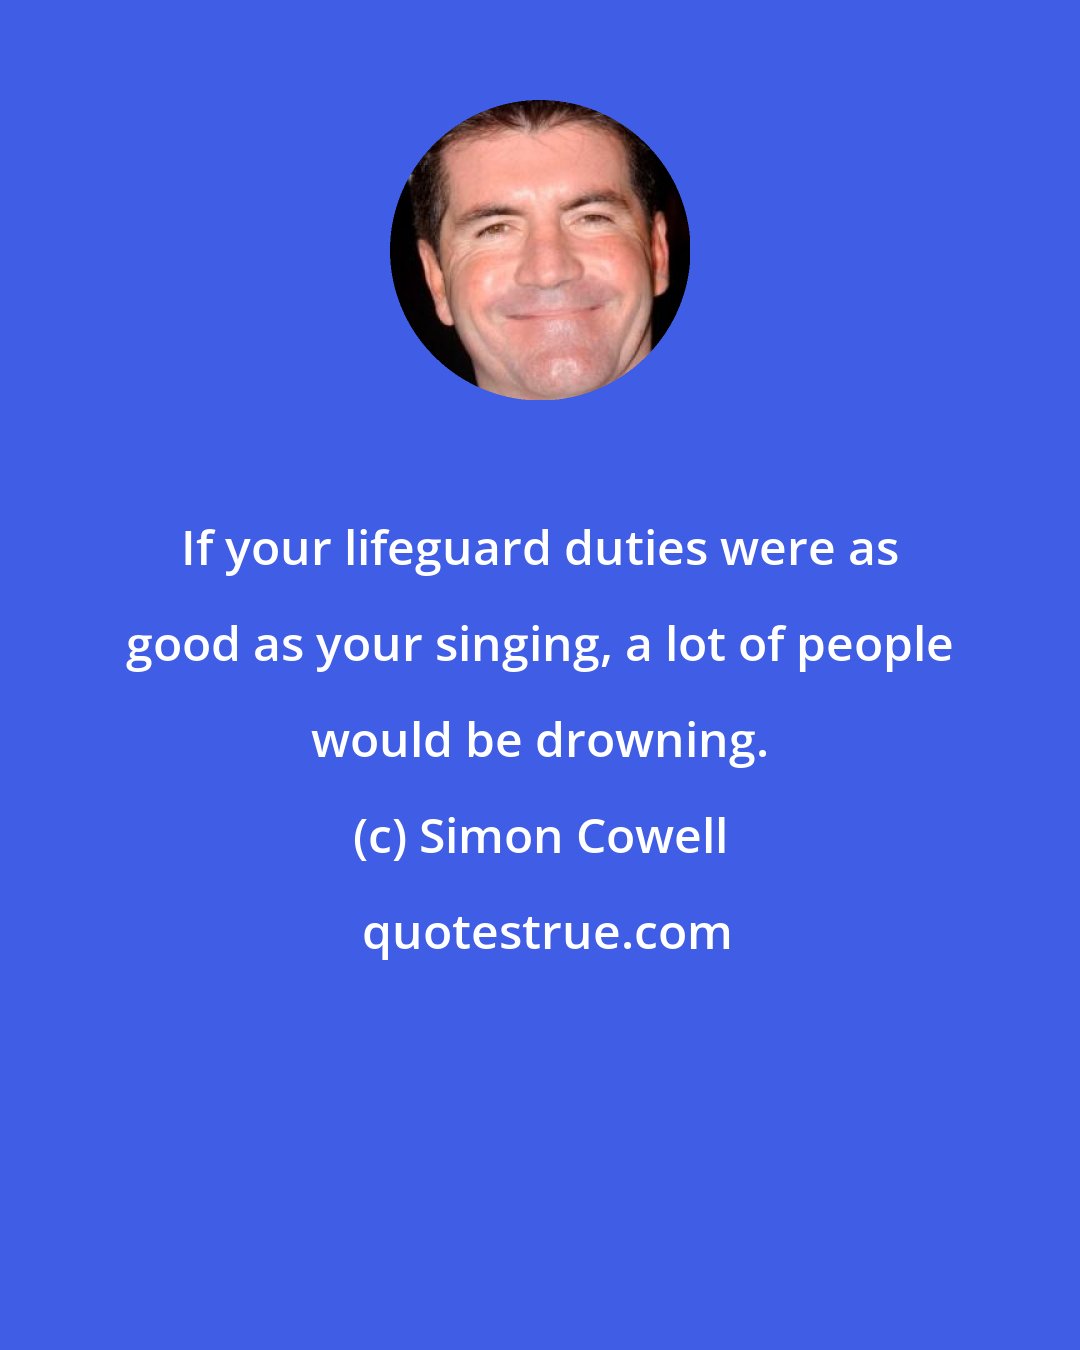 Simon Cowell: If your lifeguard duties were as good as your singing, a lot of people would be drowning.